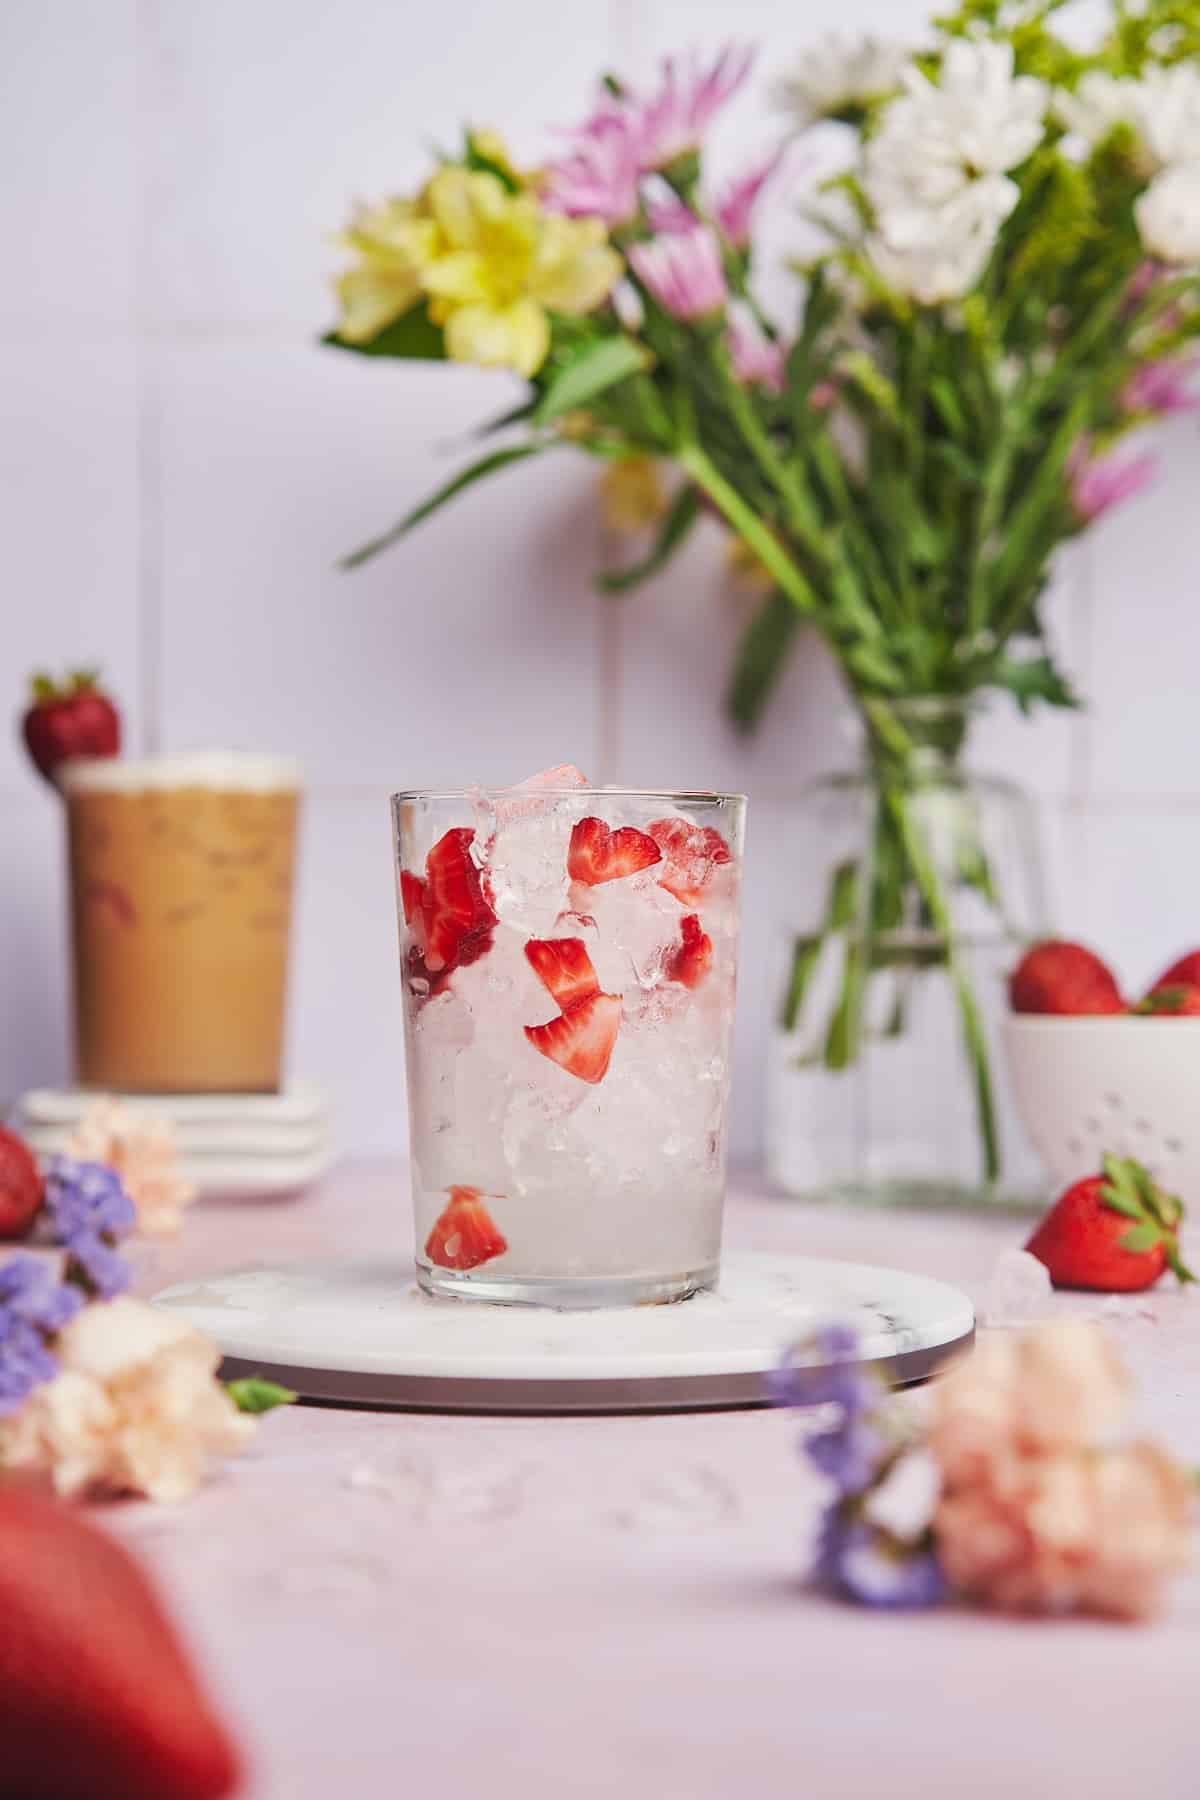 ice and strawberries in a glass with flowers in the background.